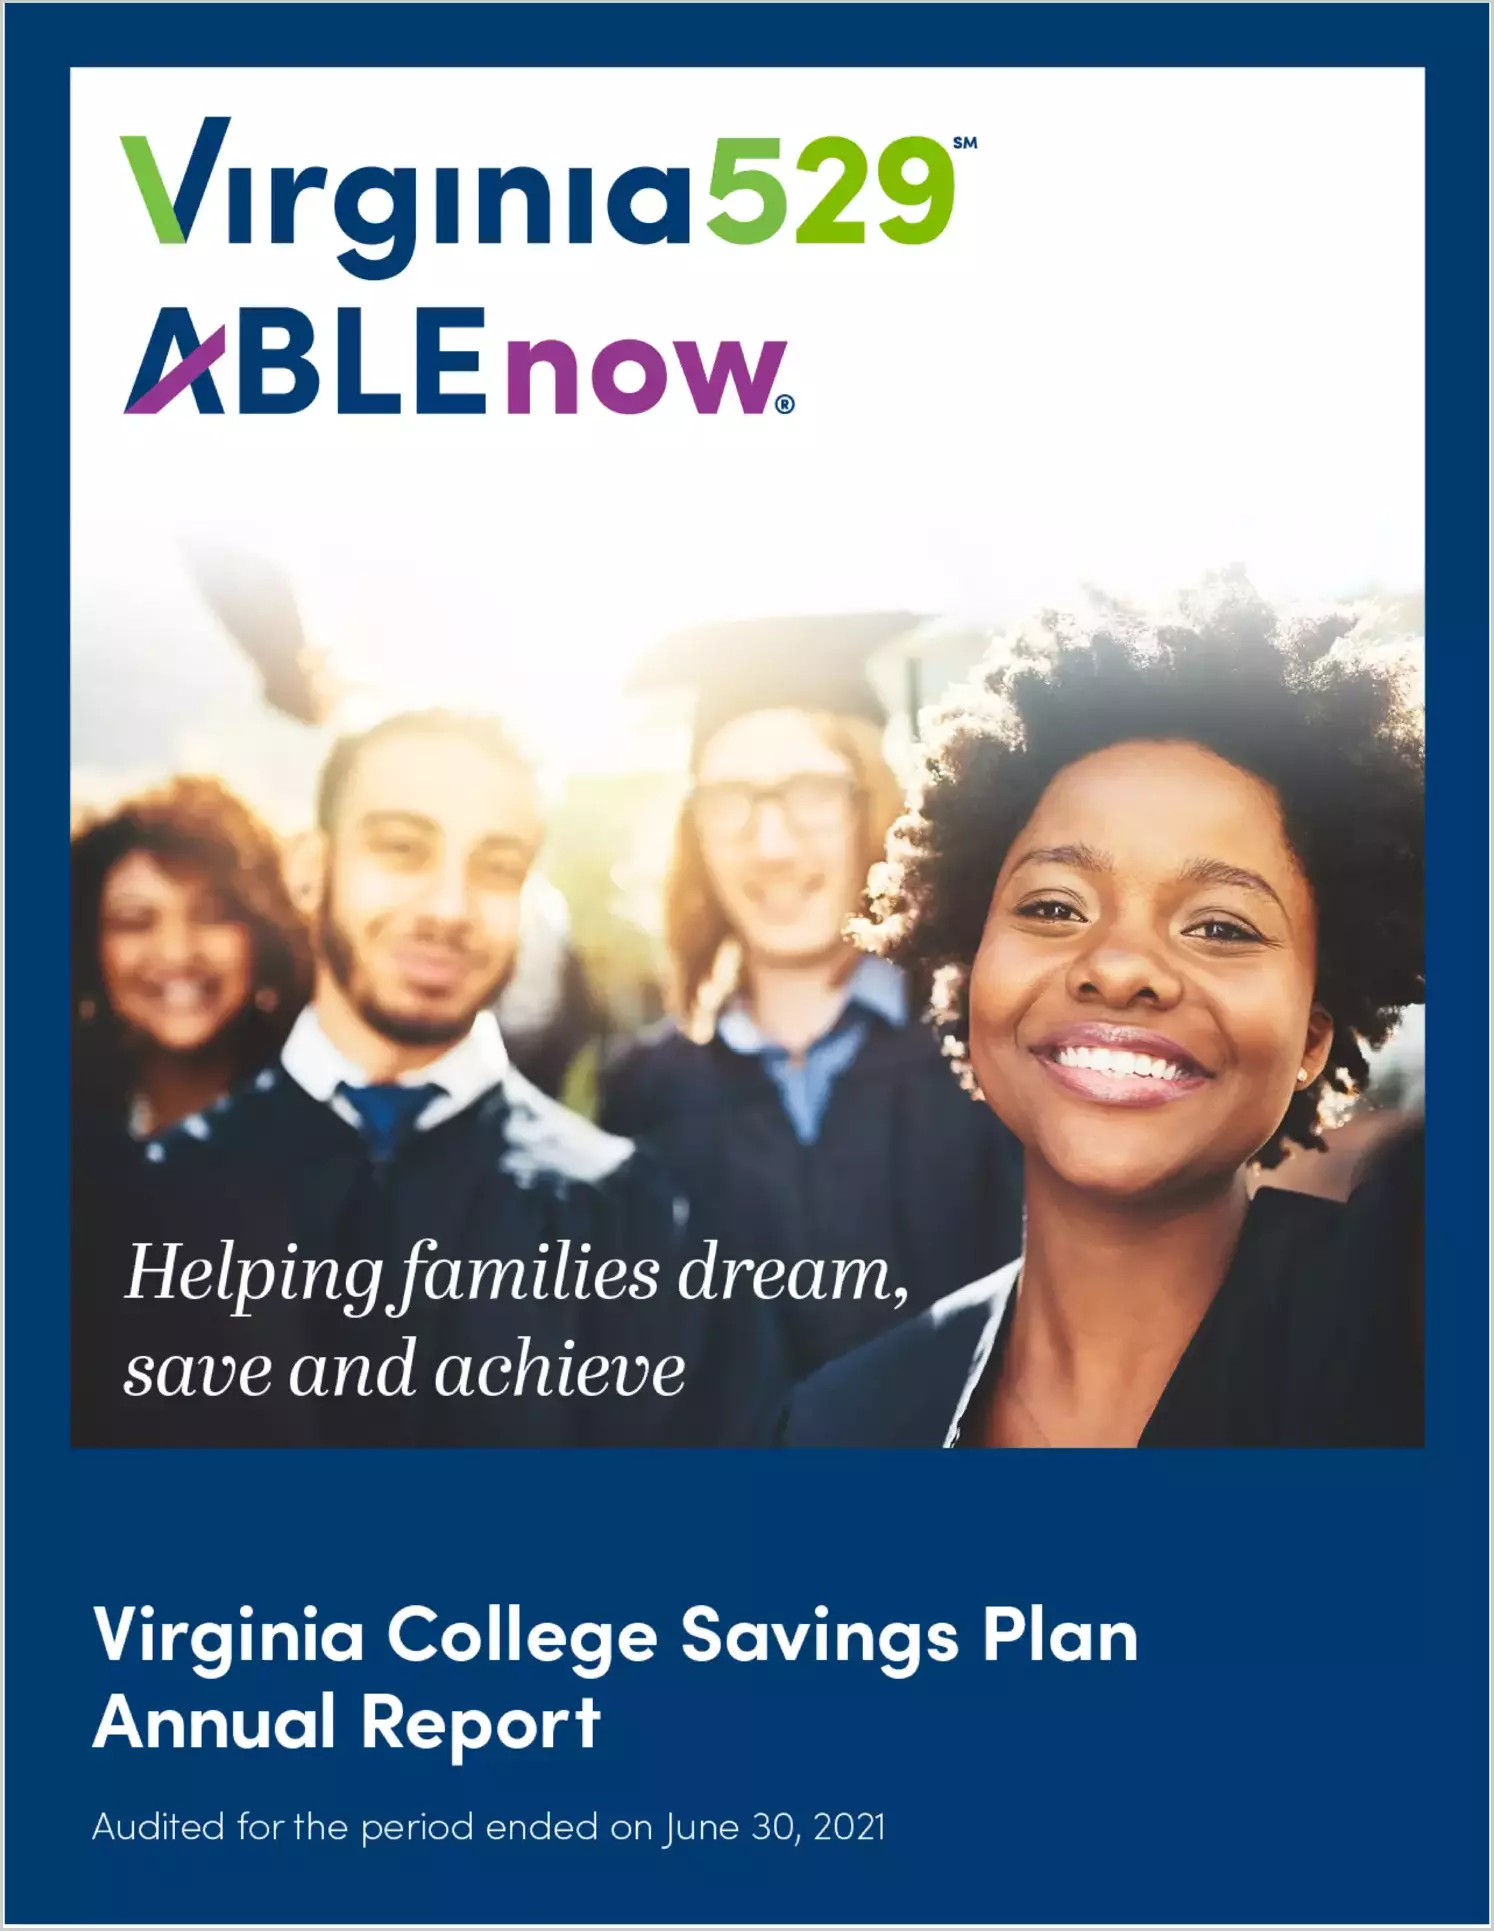 Virginia College Savings Plan Financial Statements & Internal Control Report for the year ended June 30, 2021